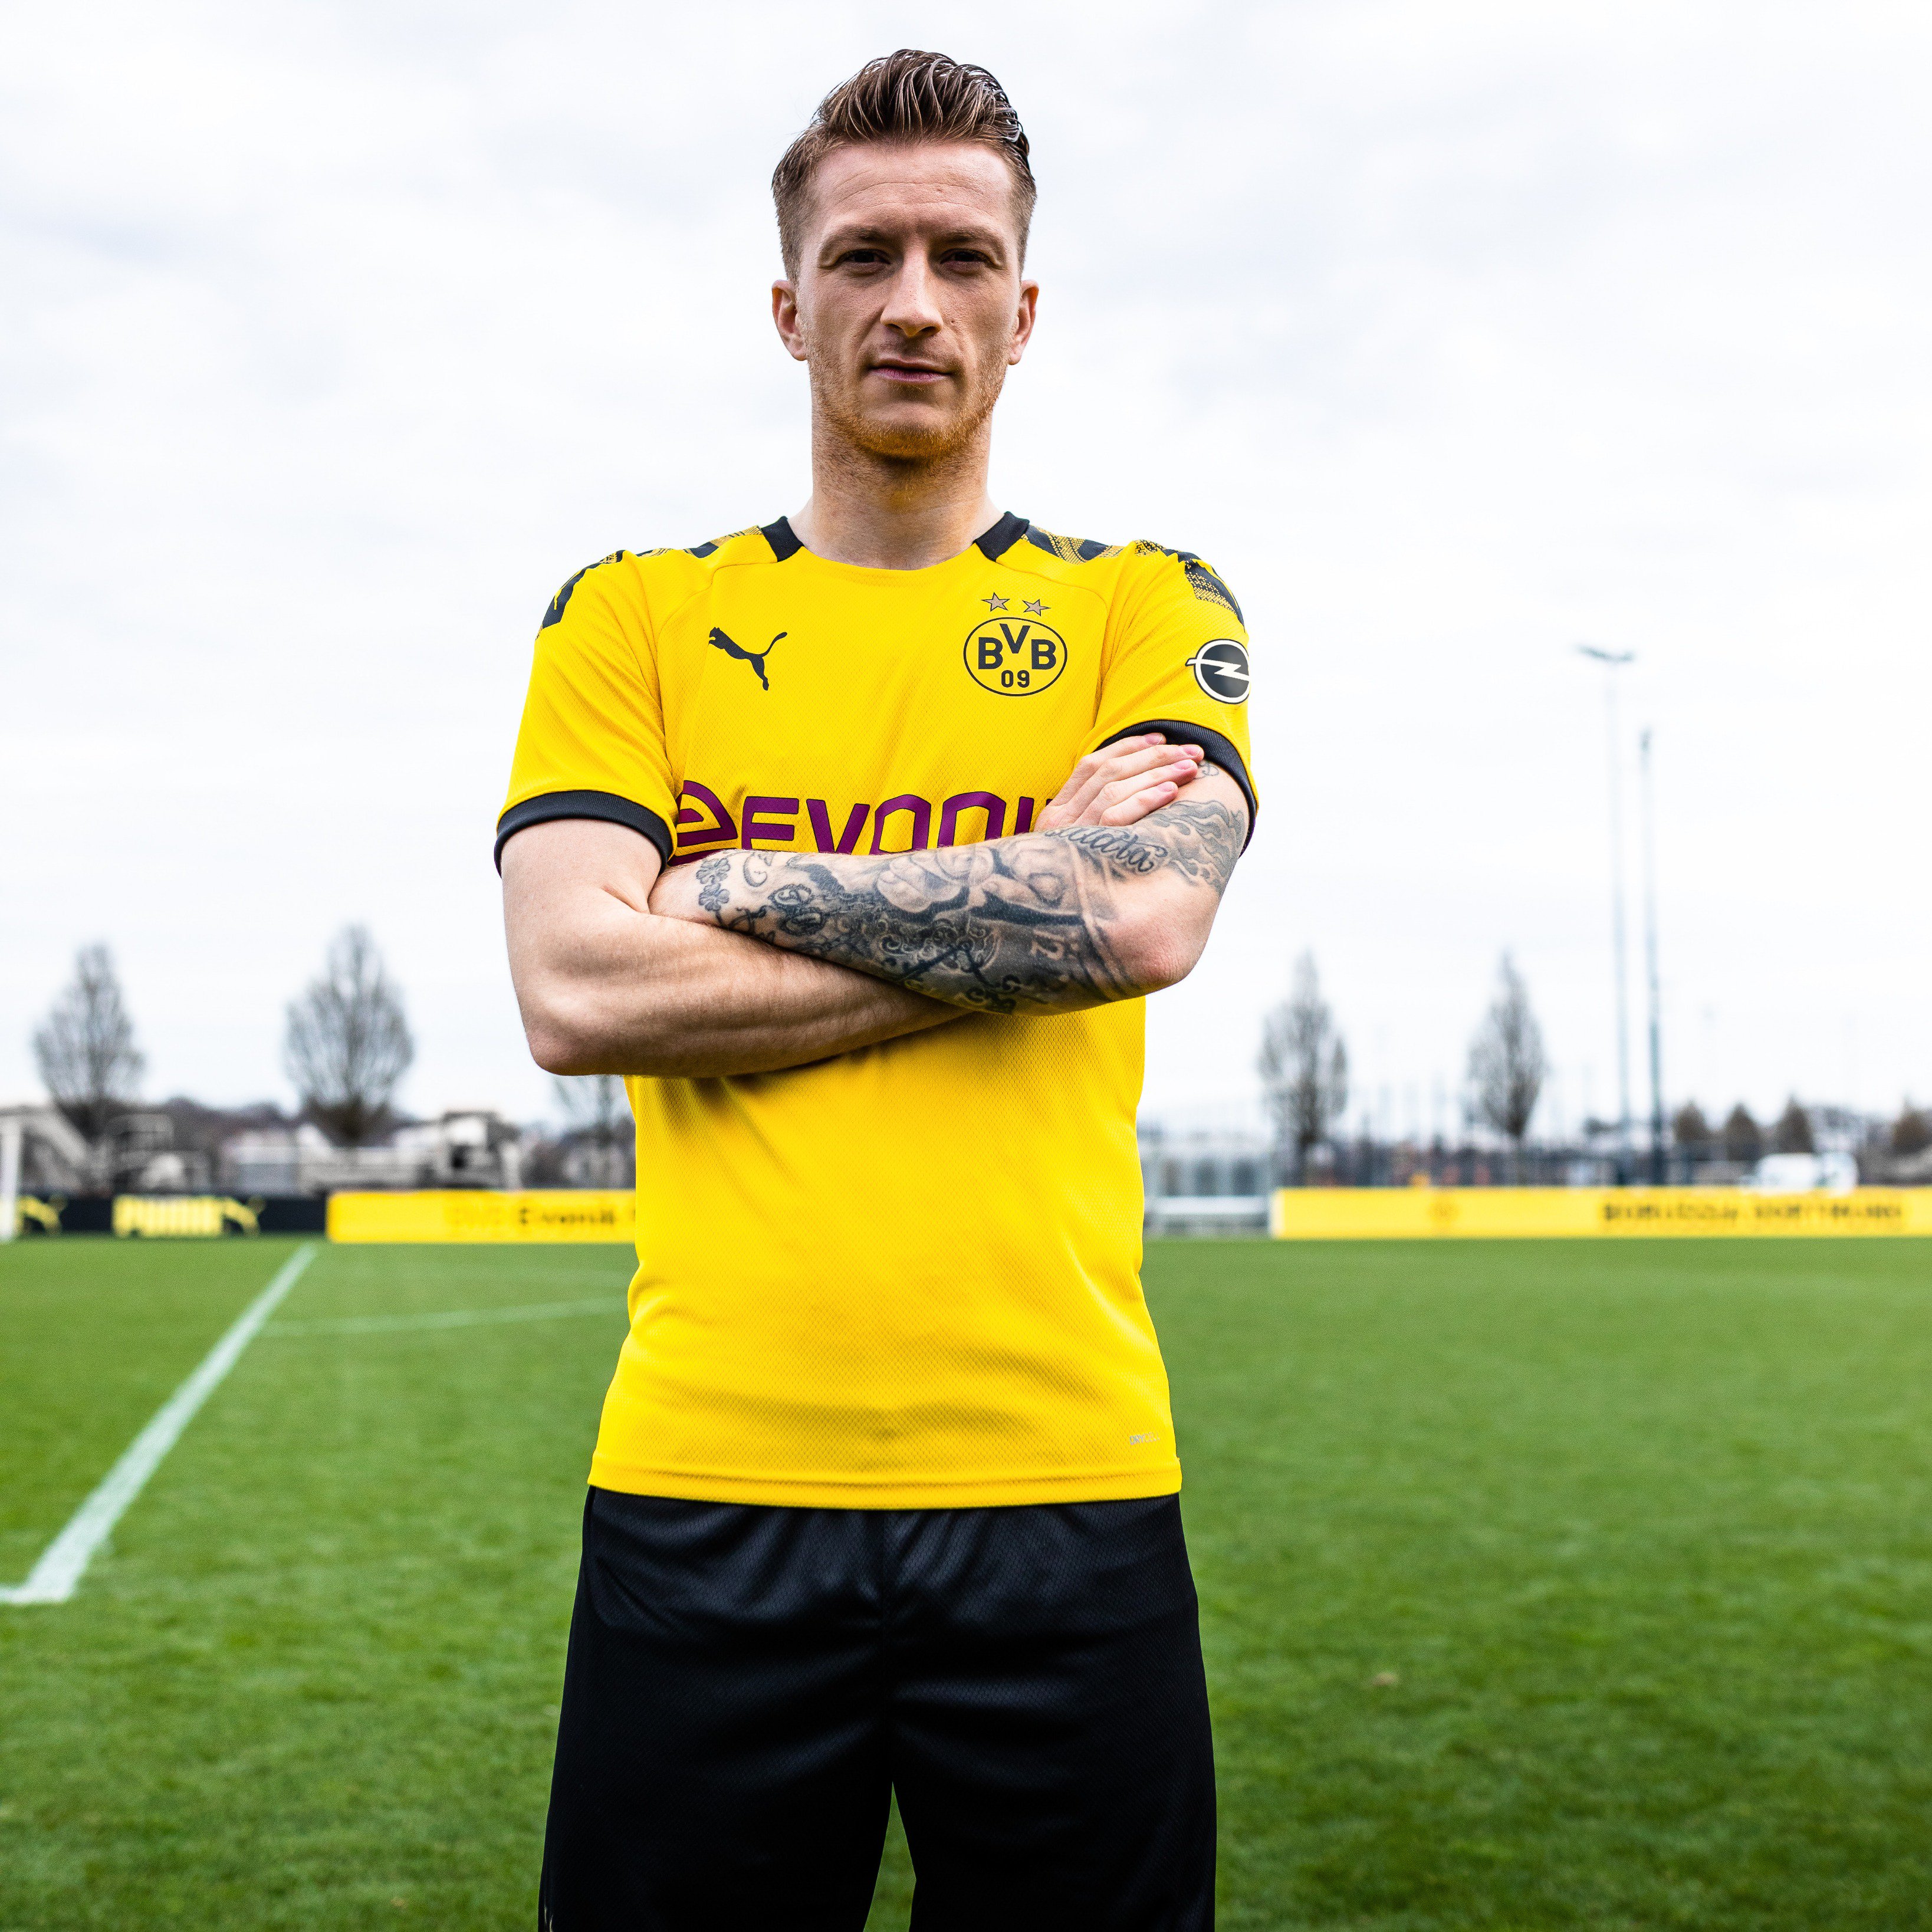 GOAL on X: Borussia Dortmund have dropped their home kit for 2019